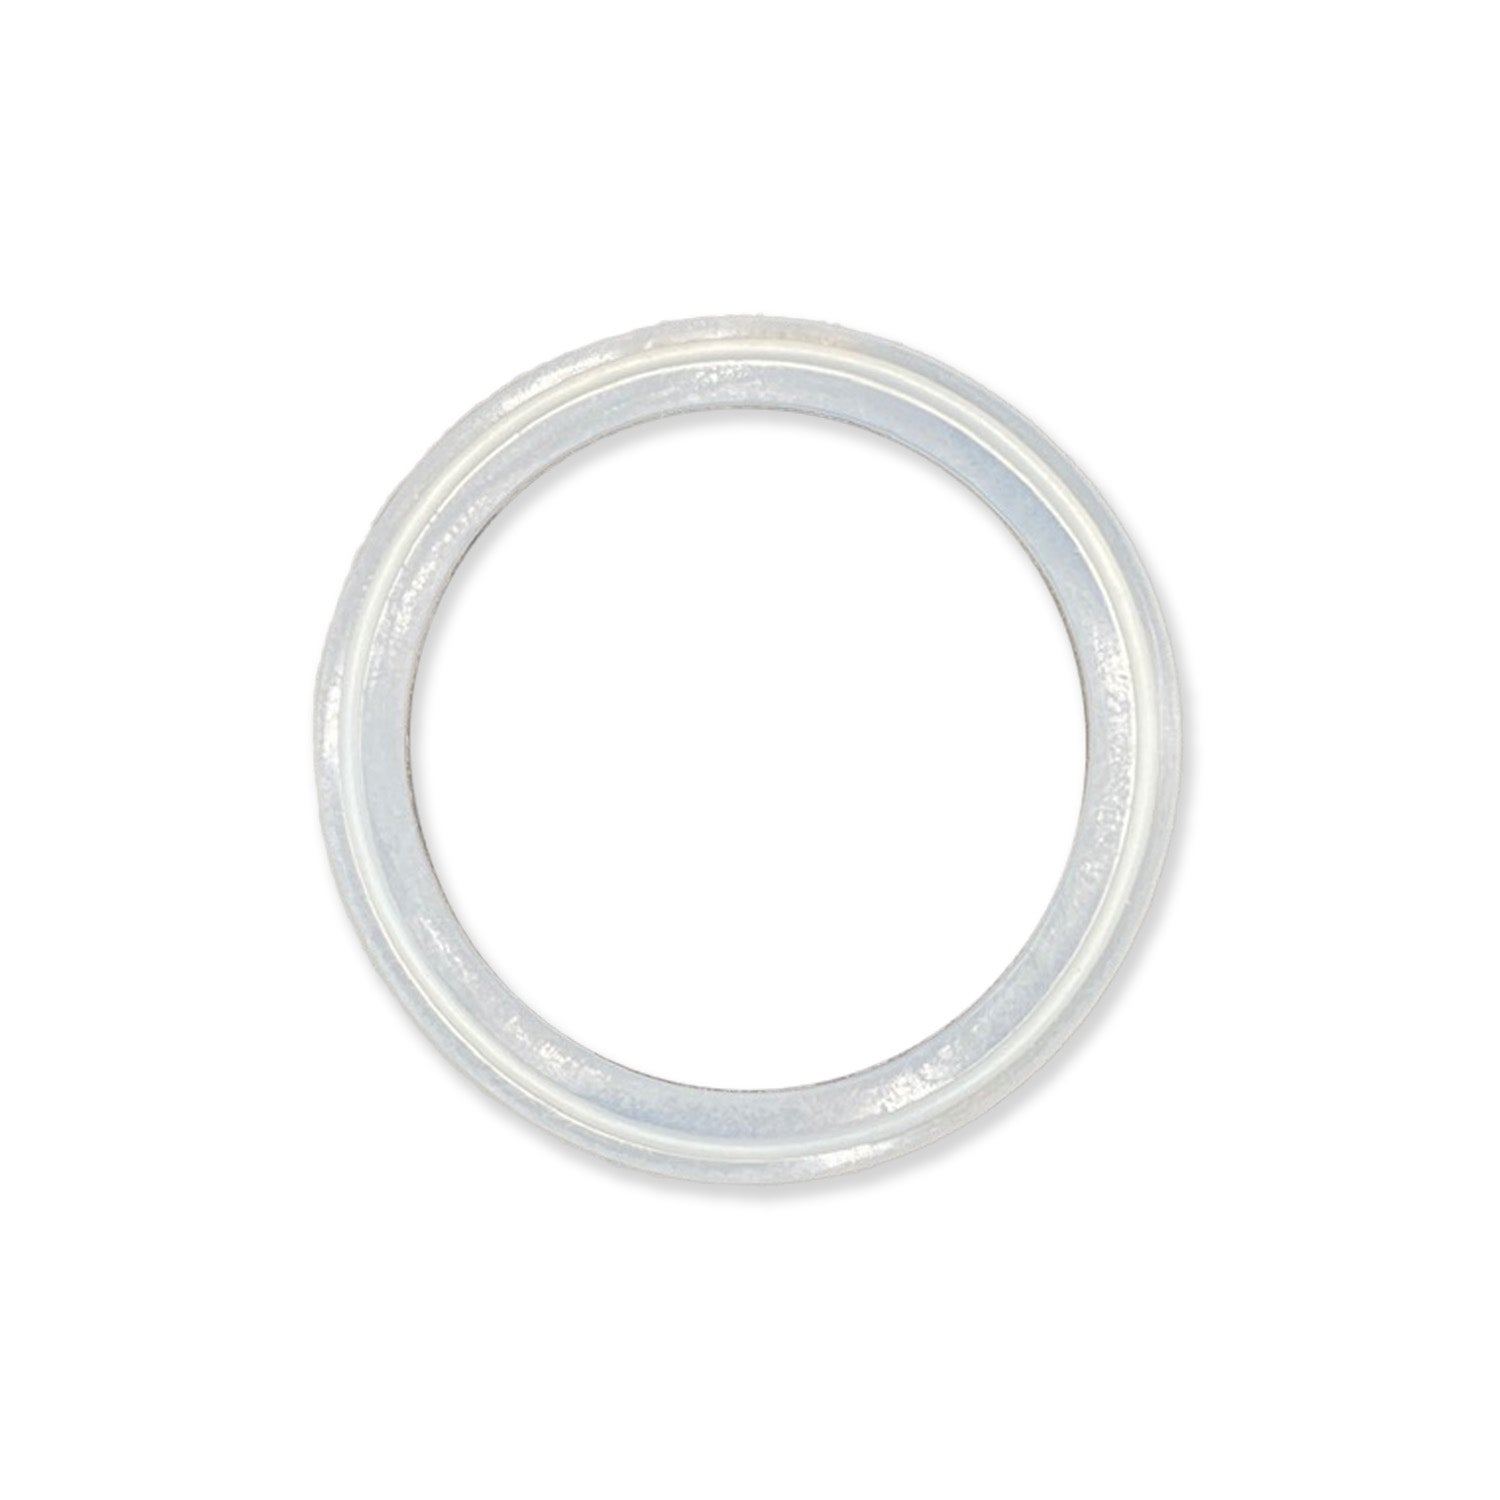 3" Tri-Clamp Gasket, Silicone, clear